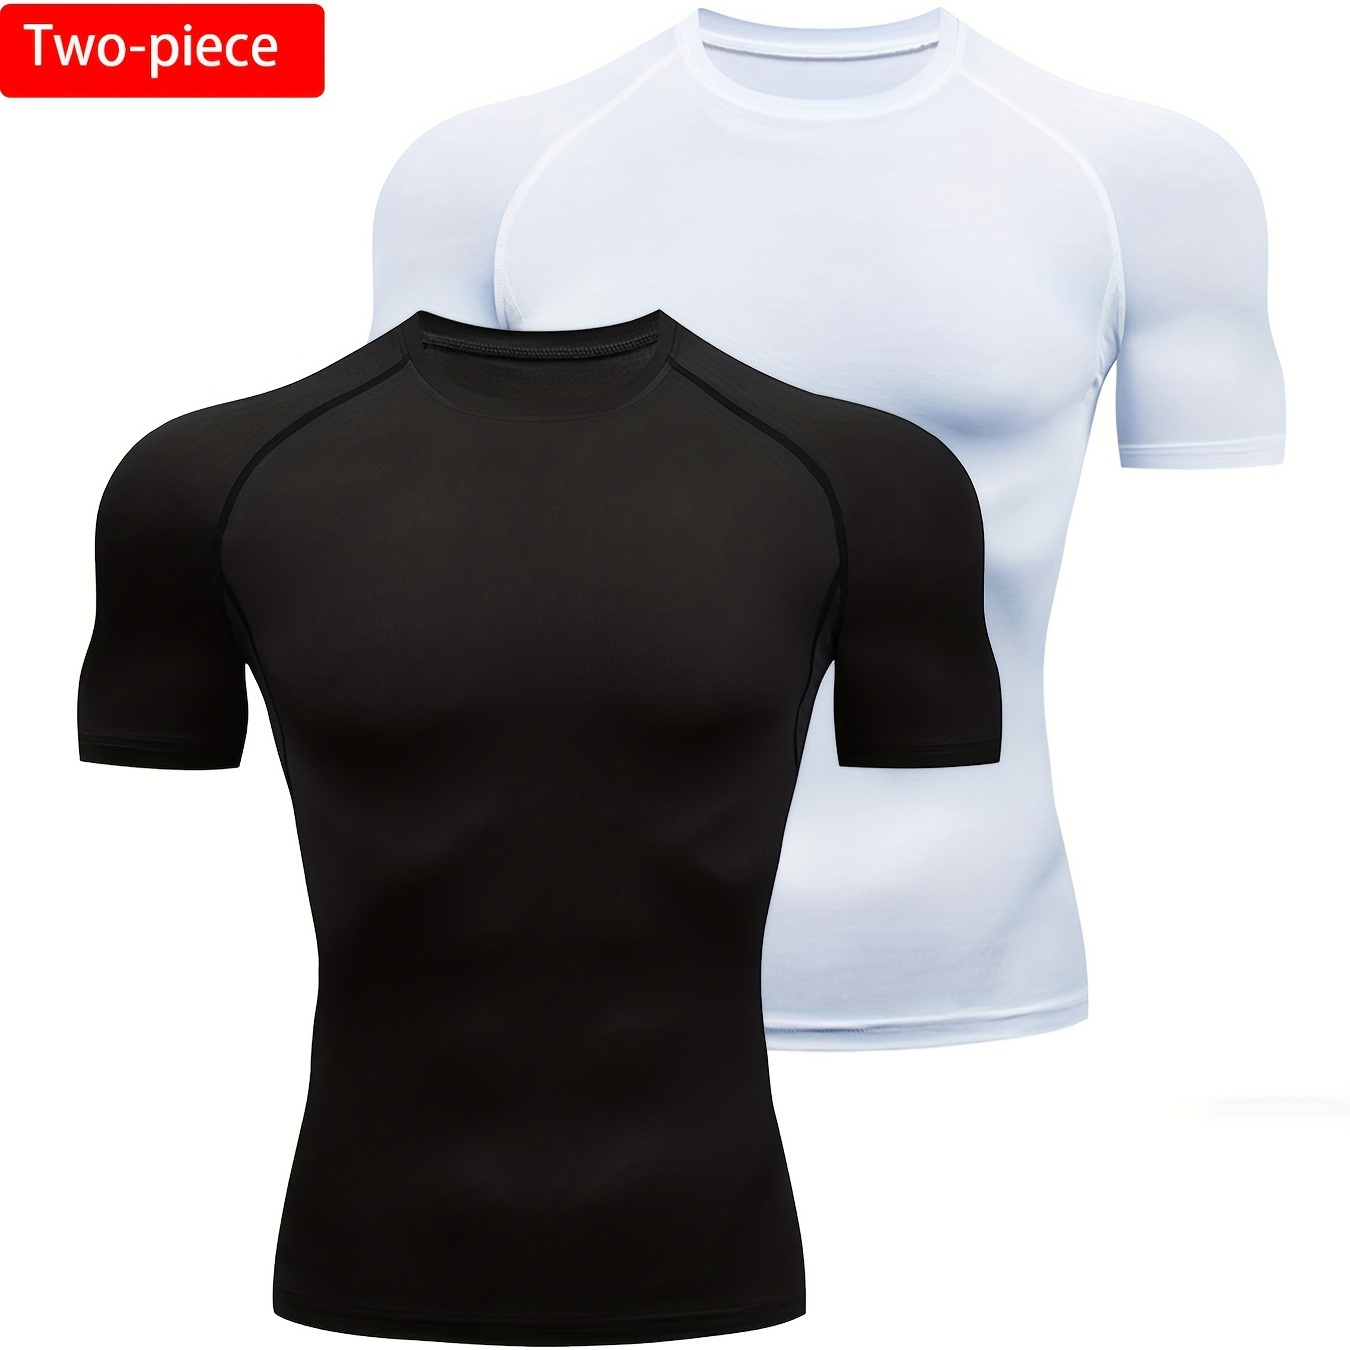 

2pcs Men's Quick Dry Sports T-shirts: High Stretch, Breathable, Compression & Moisture Wicking For Outdoor Activities!